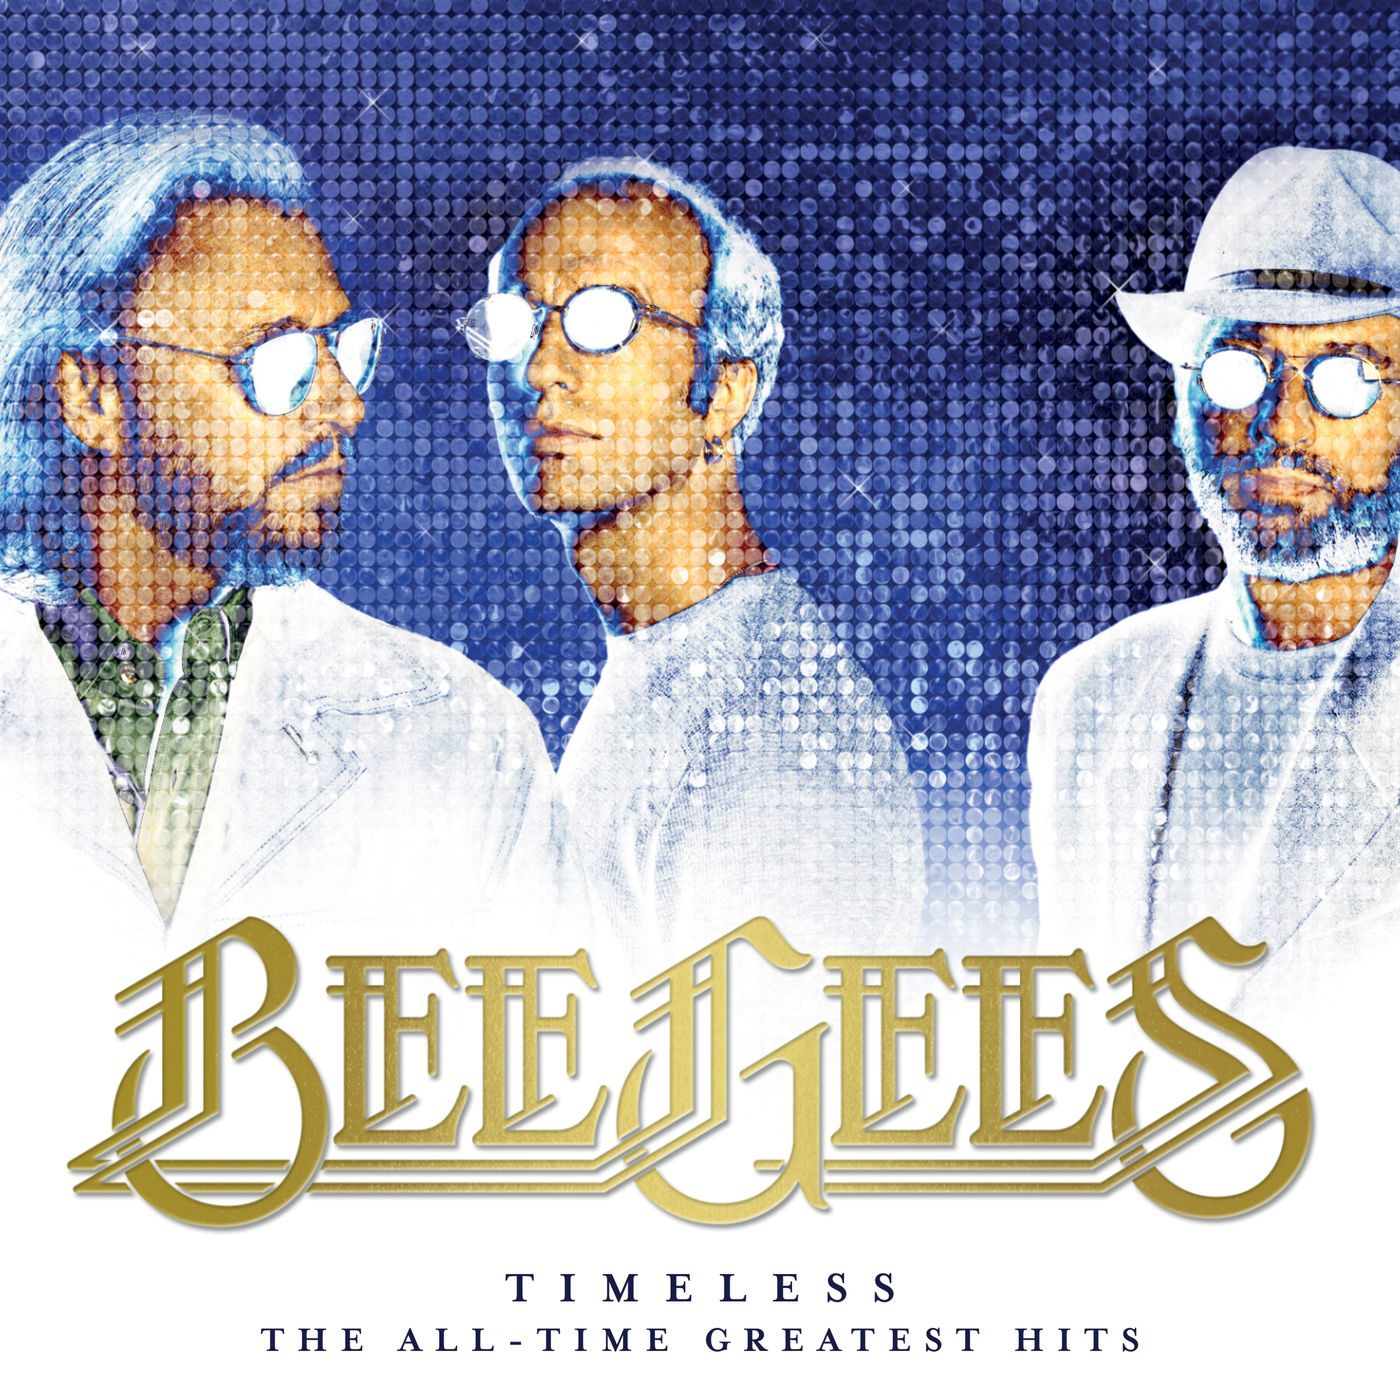 Bee Gees - Timeless - The All-Time Greatest Hits (2017/2021) [FLAC 24bit/96kHz]